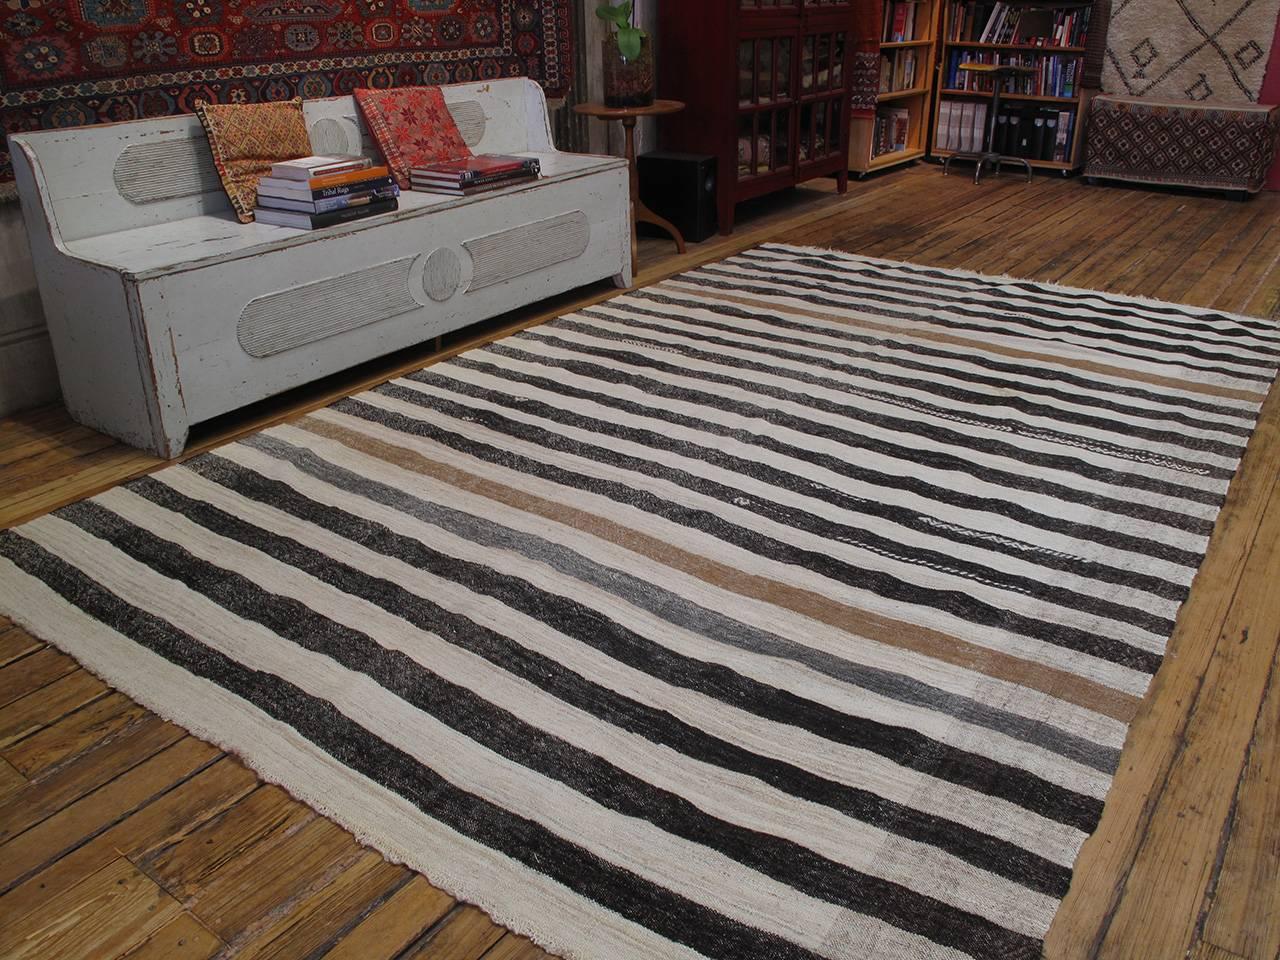 A beautiful, simple flat-weave from West-Central Turkey, woven with wool in alternating bands of natural ivory, beige, gray and brown. Scattered tribal motifs in brocading add to the charm. Unusually large for the type.